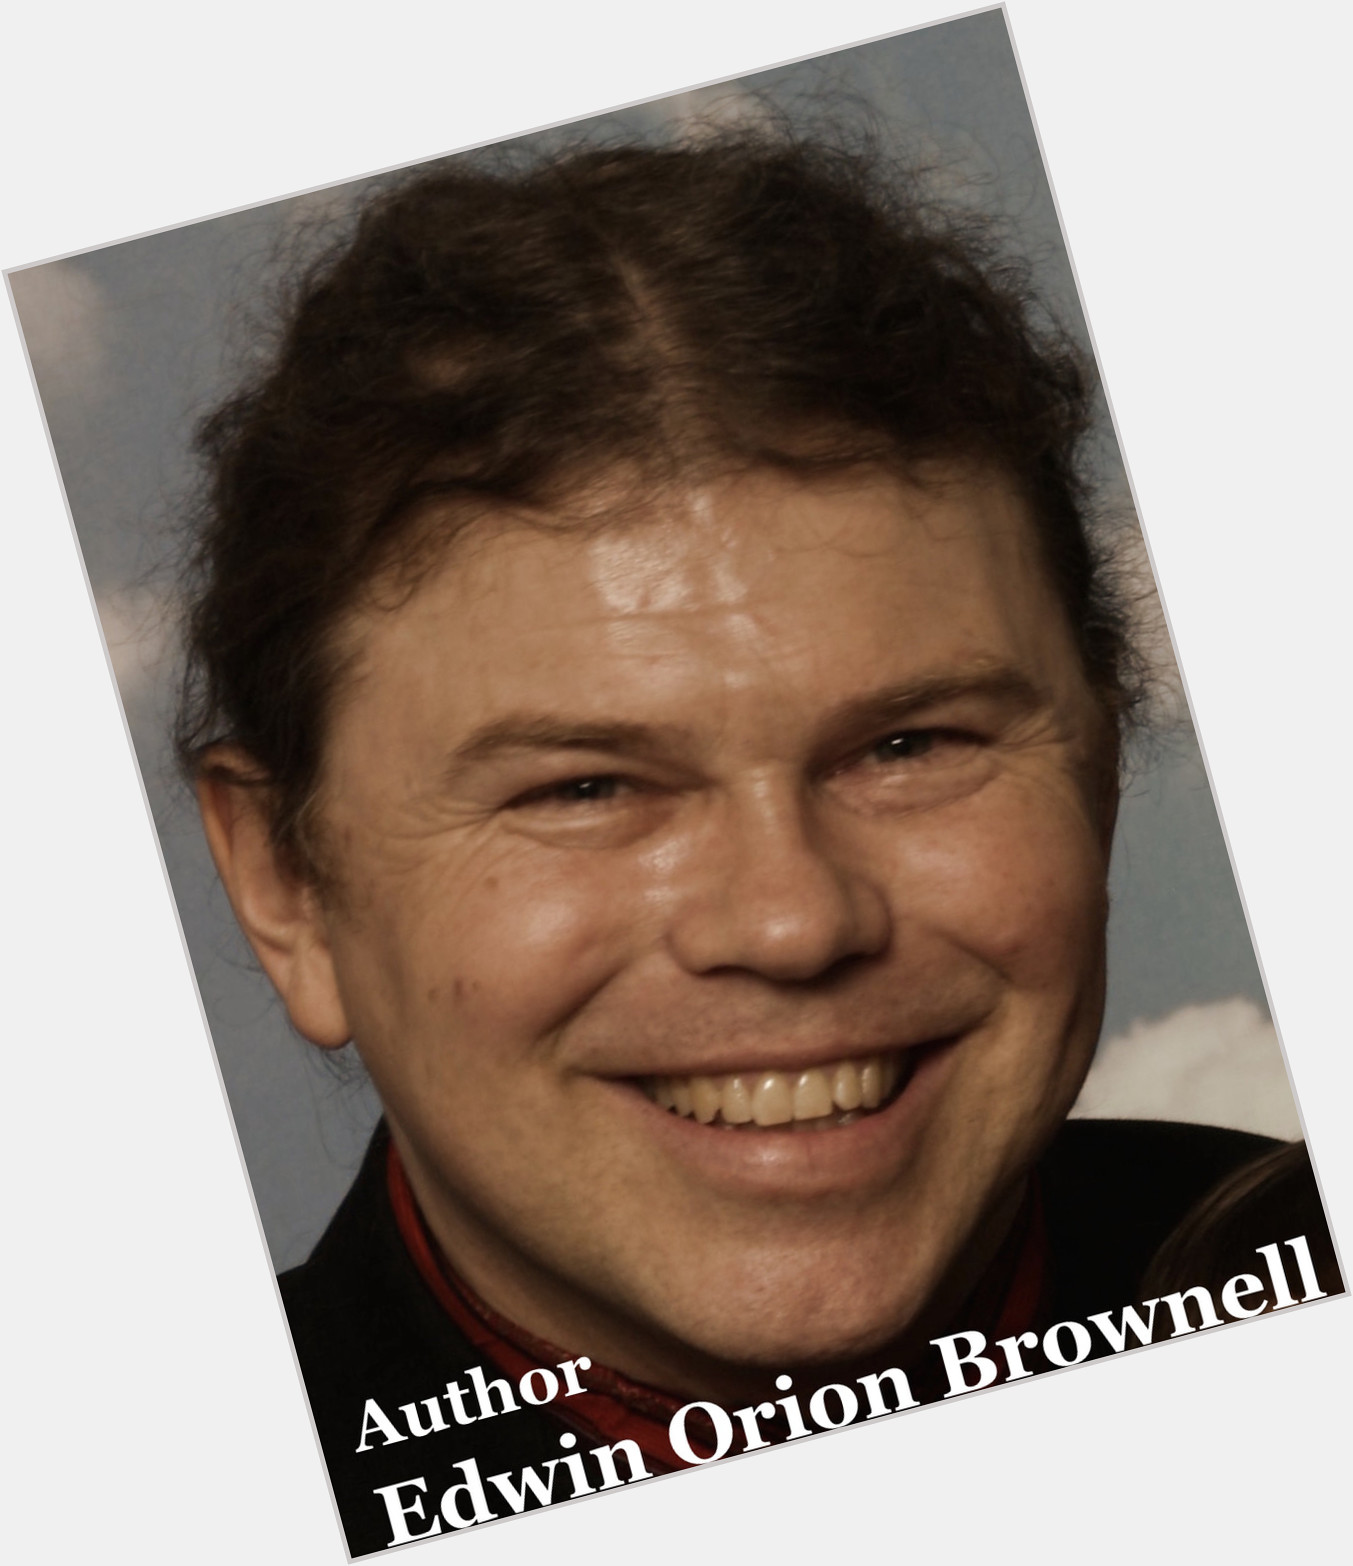 Edwin Orion Brownell birthday 2015